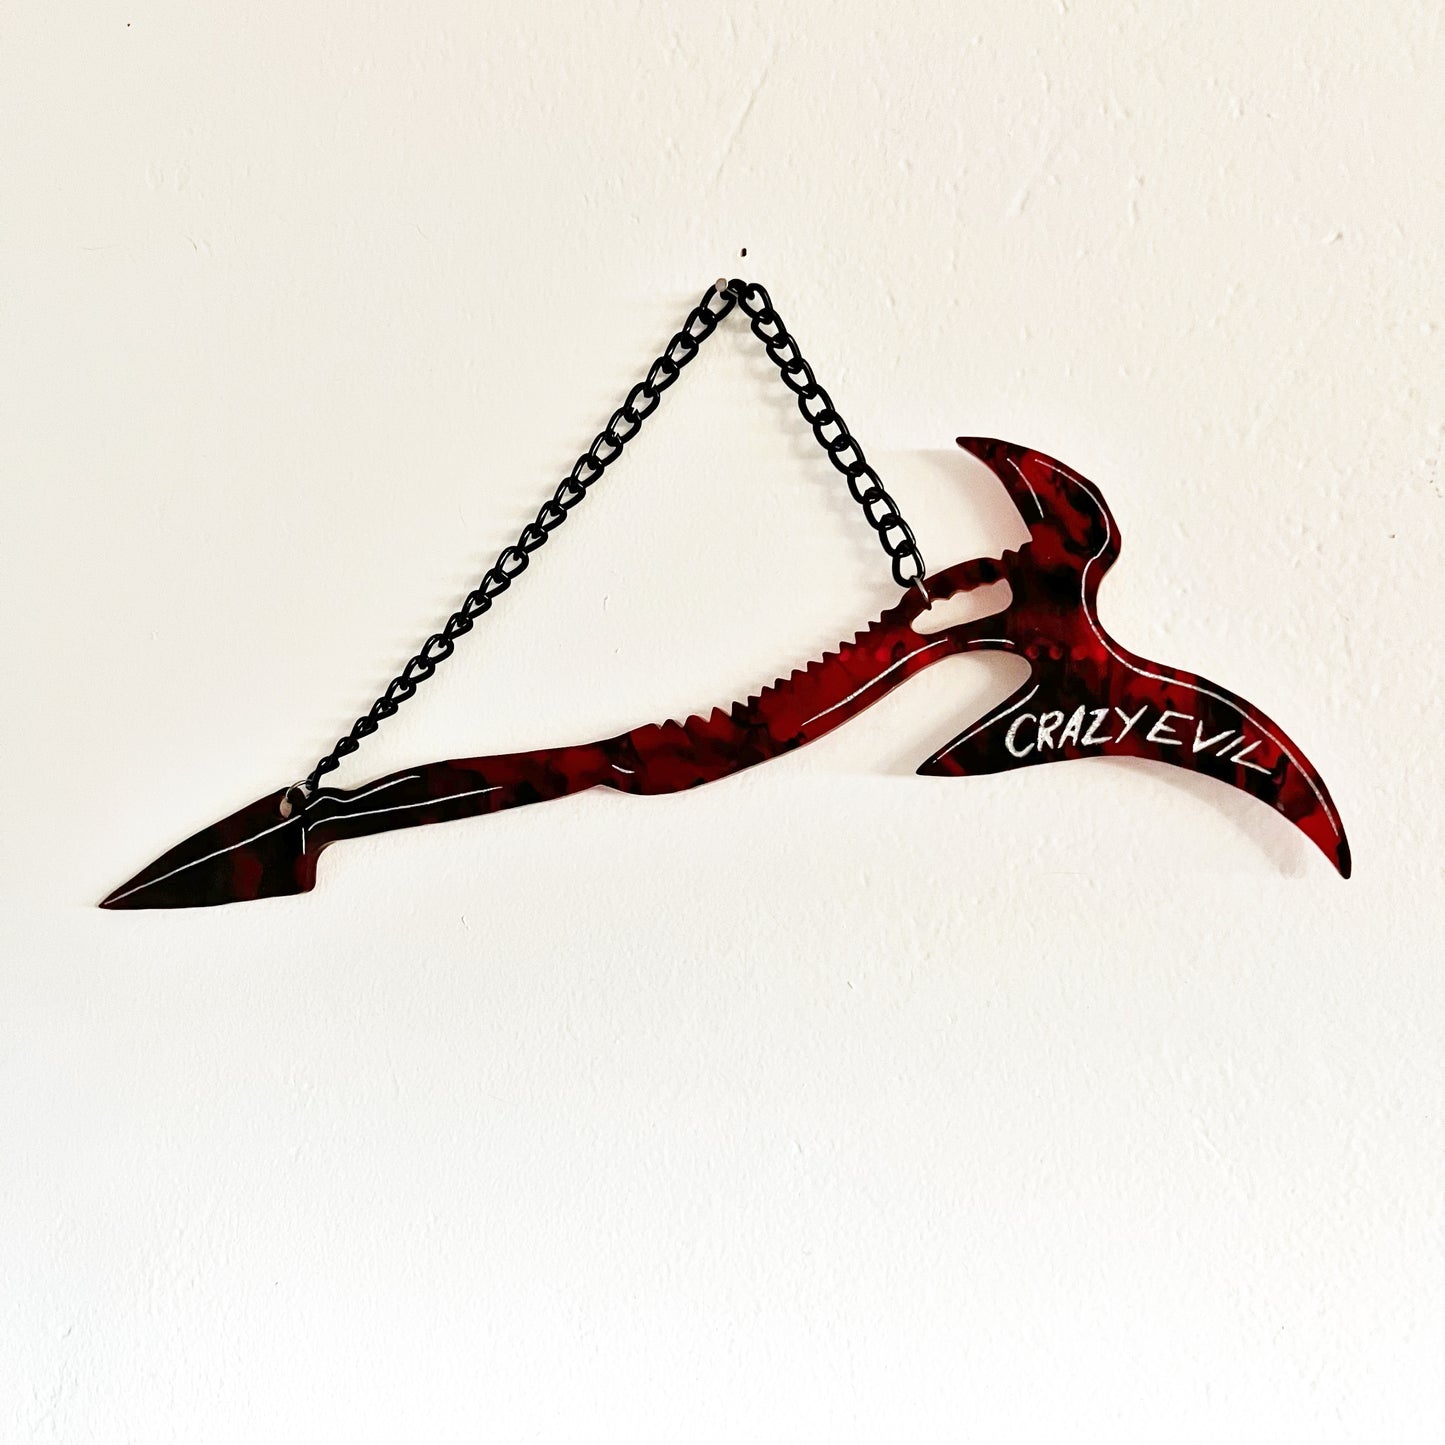 Mandy Movie Merch  - A Replica of the weapon from the film, called "The Beast". Large red and black swirled syth-axe hybrid hanging from a black chain.